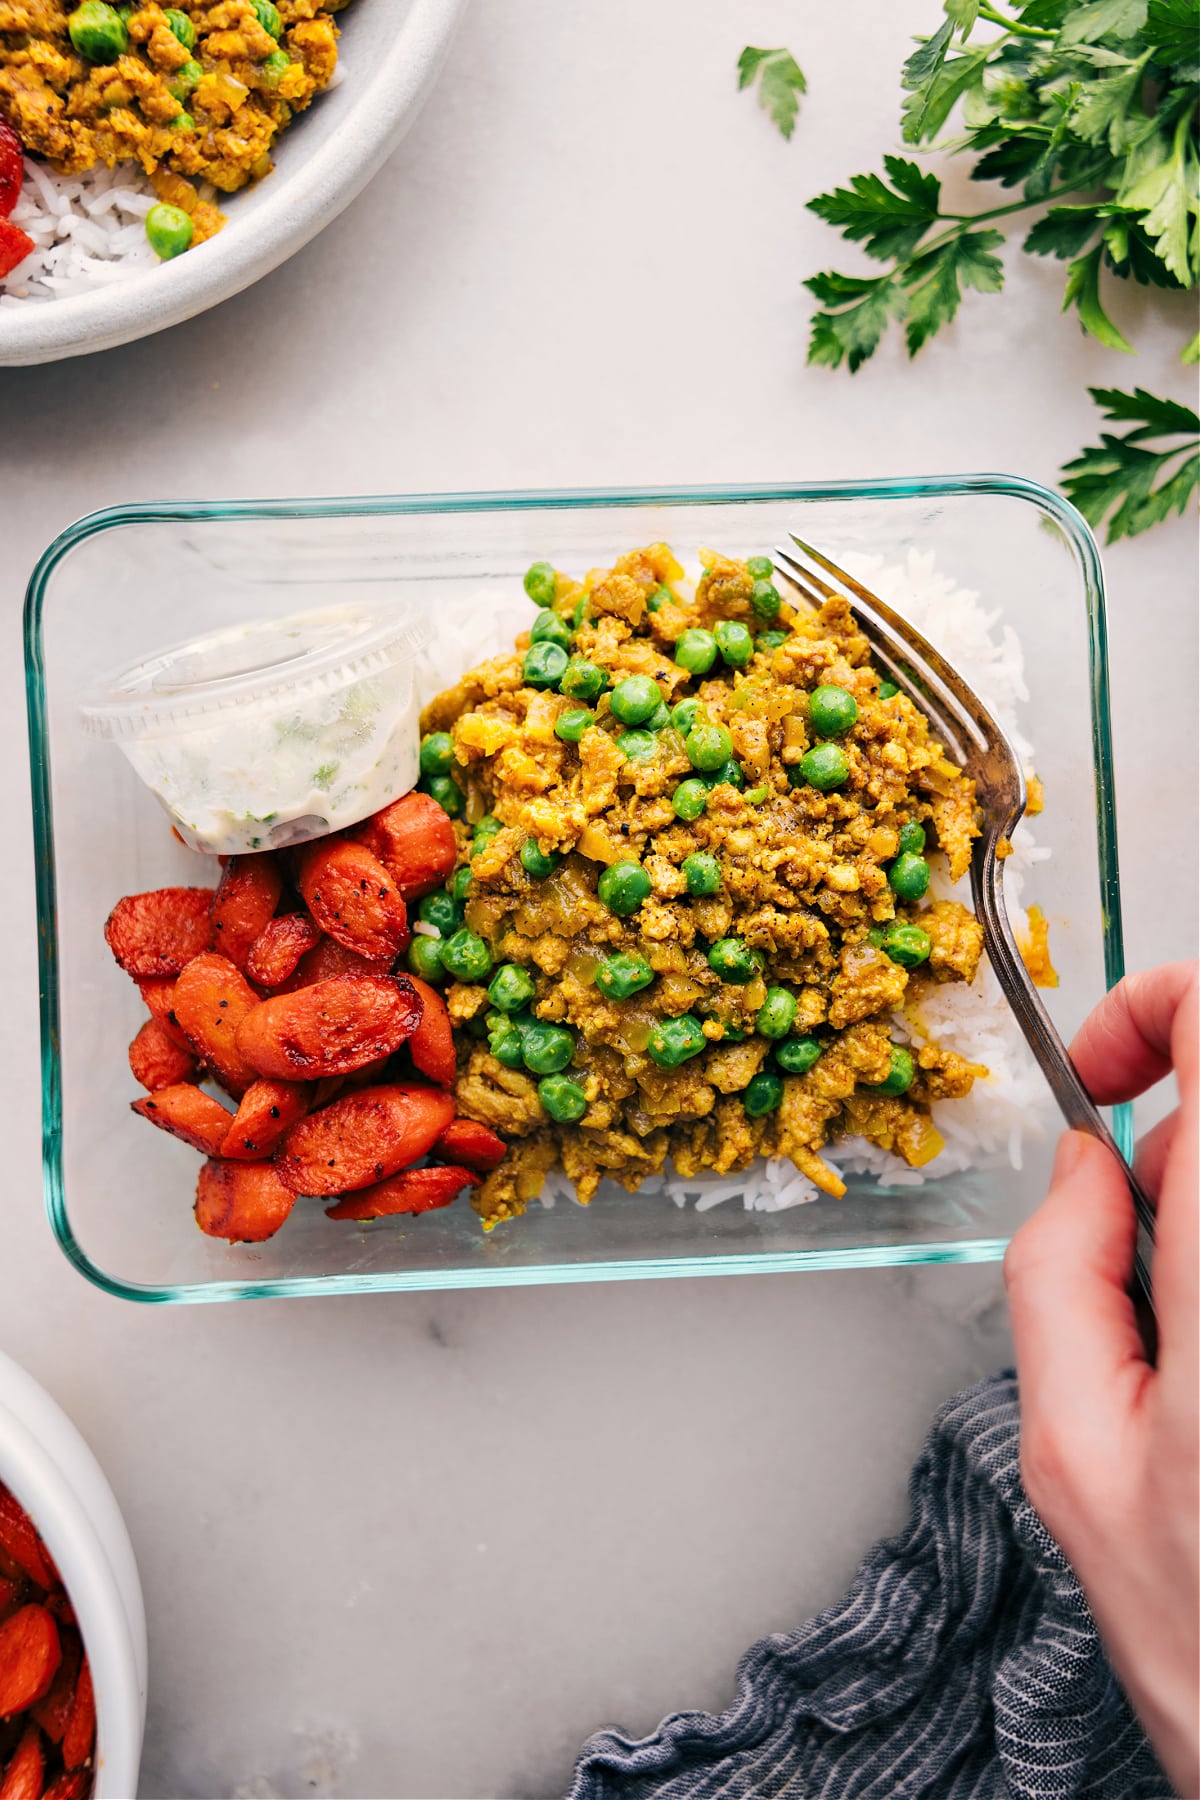 A meal-prepped tupperware container filled with rice, savory Indian ground turkey, roasted vegetables, and sauce, ready for a quick and delicious meal.